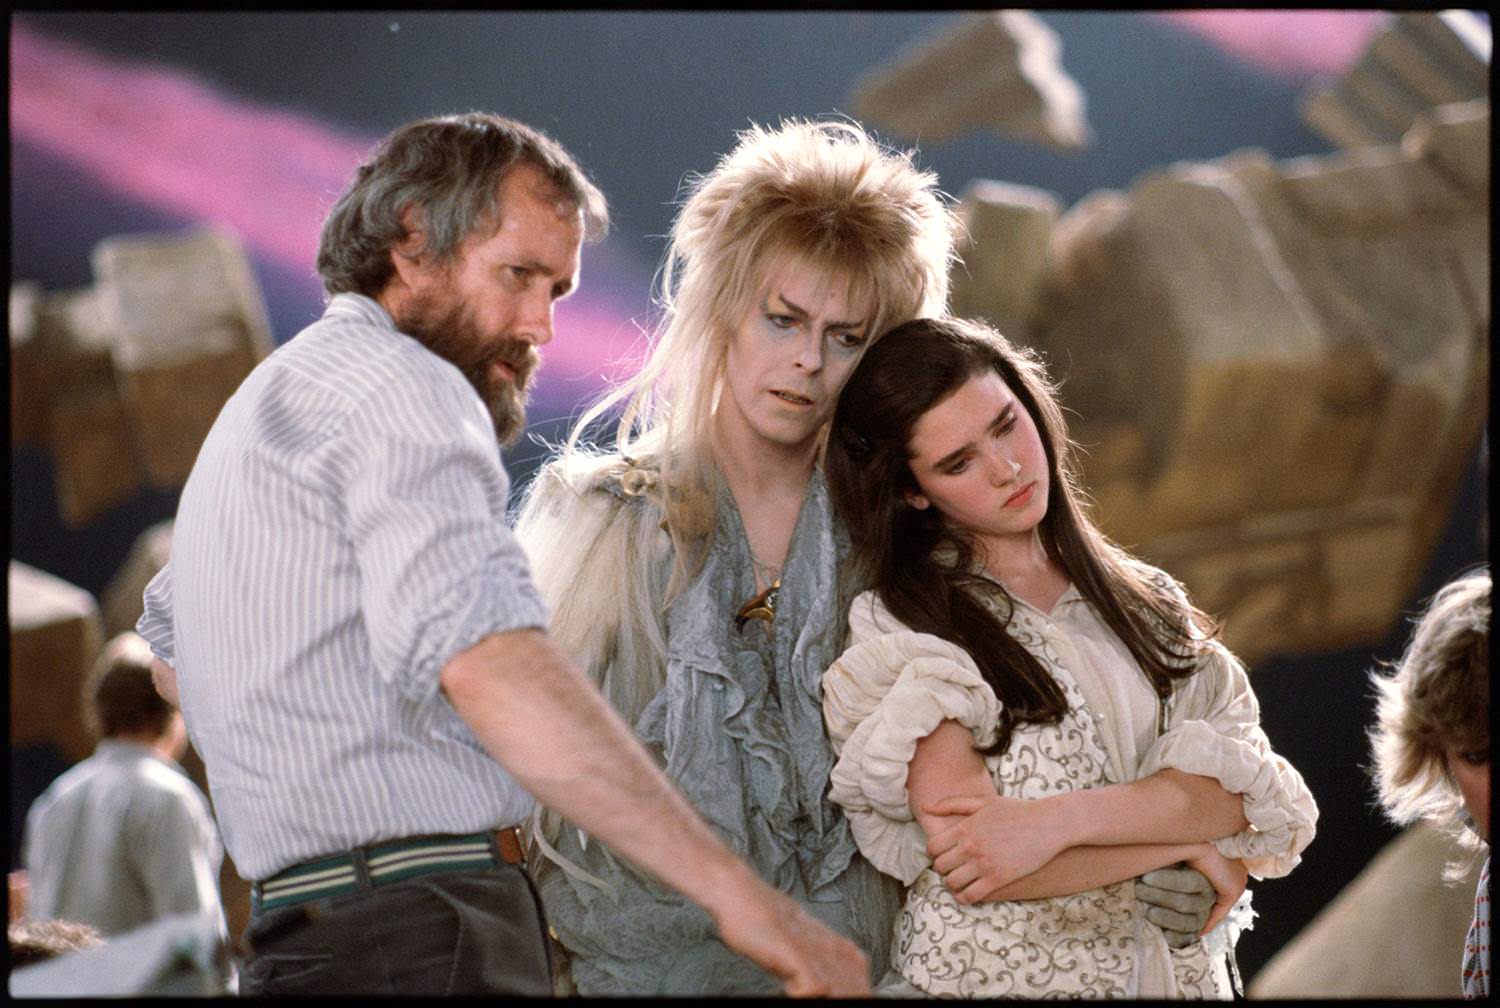 Director Jim Henson showing David Bowie and Jennifer Connelly how he wants them to look for a scene in Labyrinth in 1986.